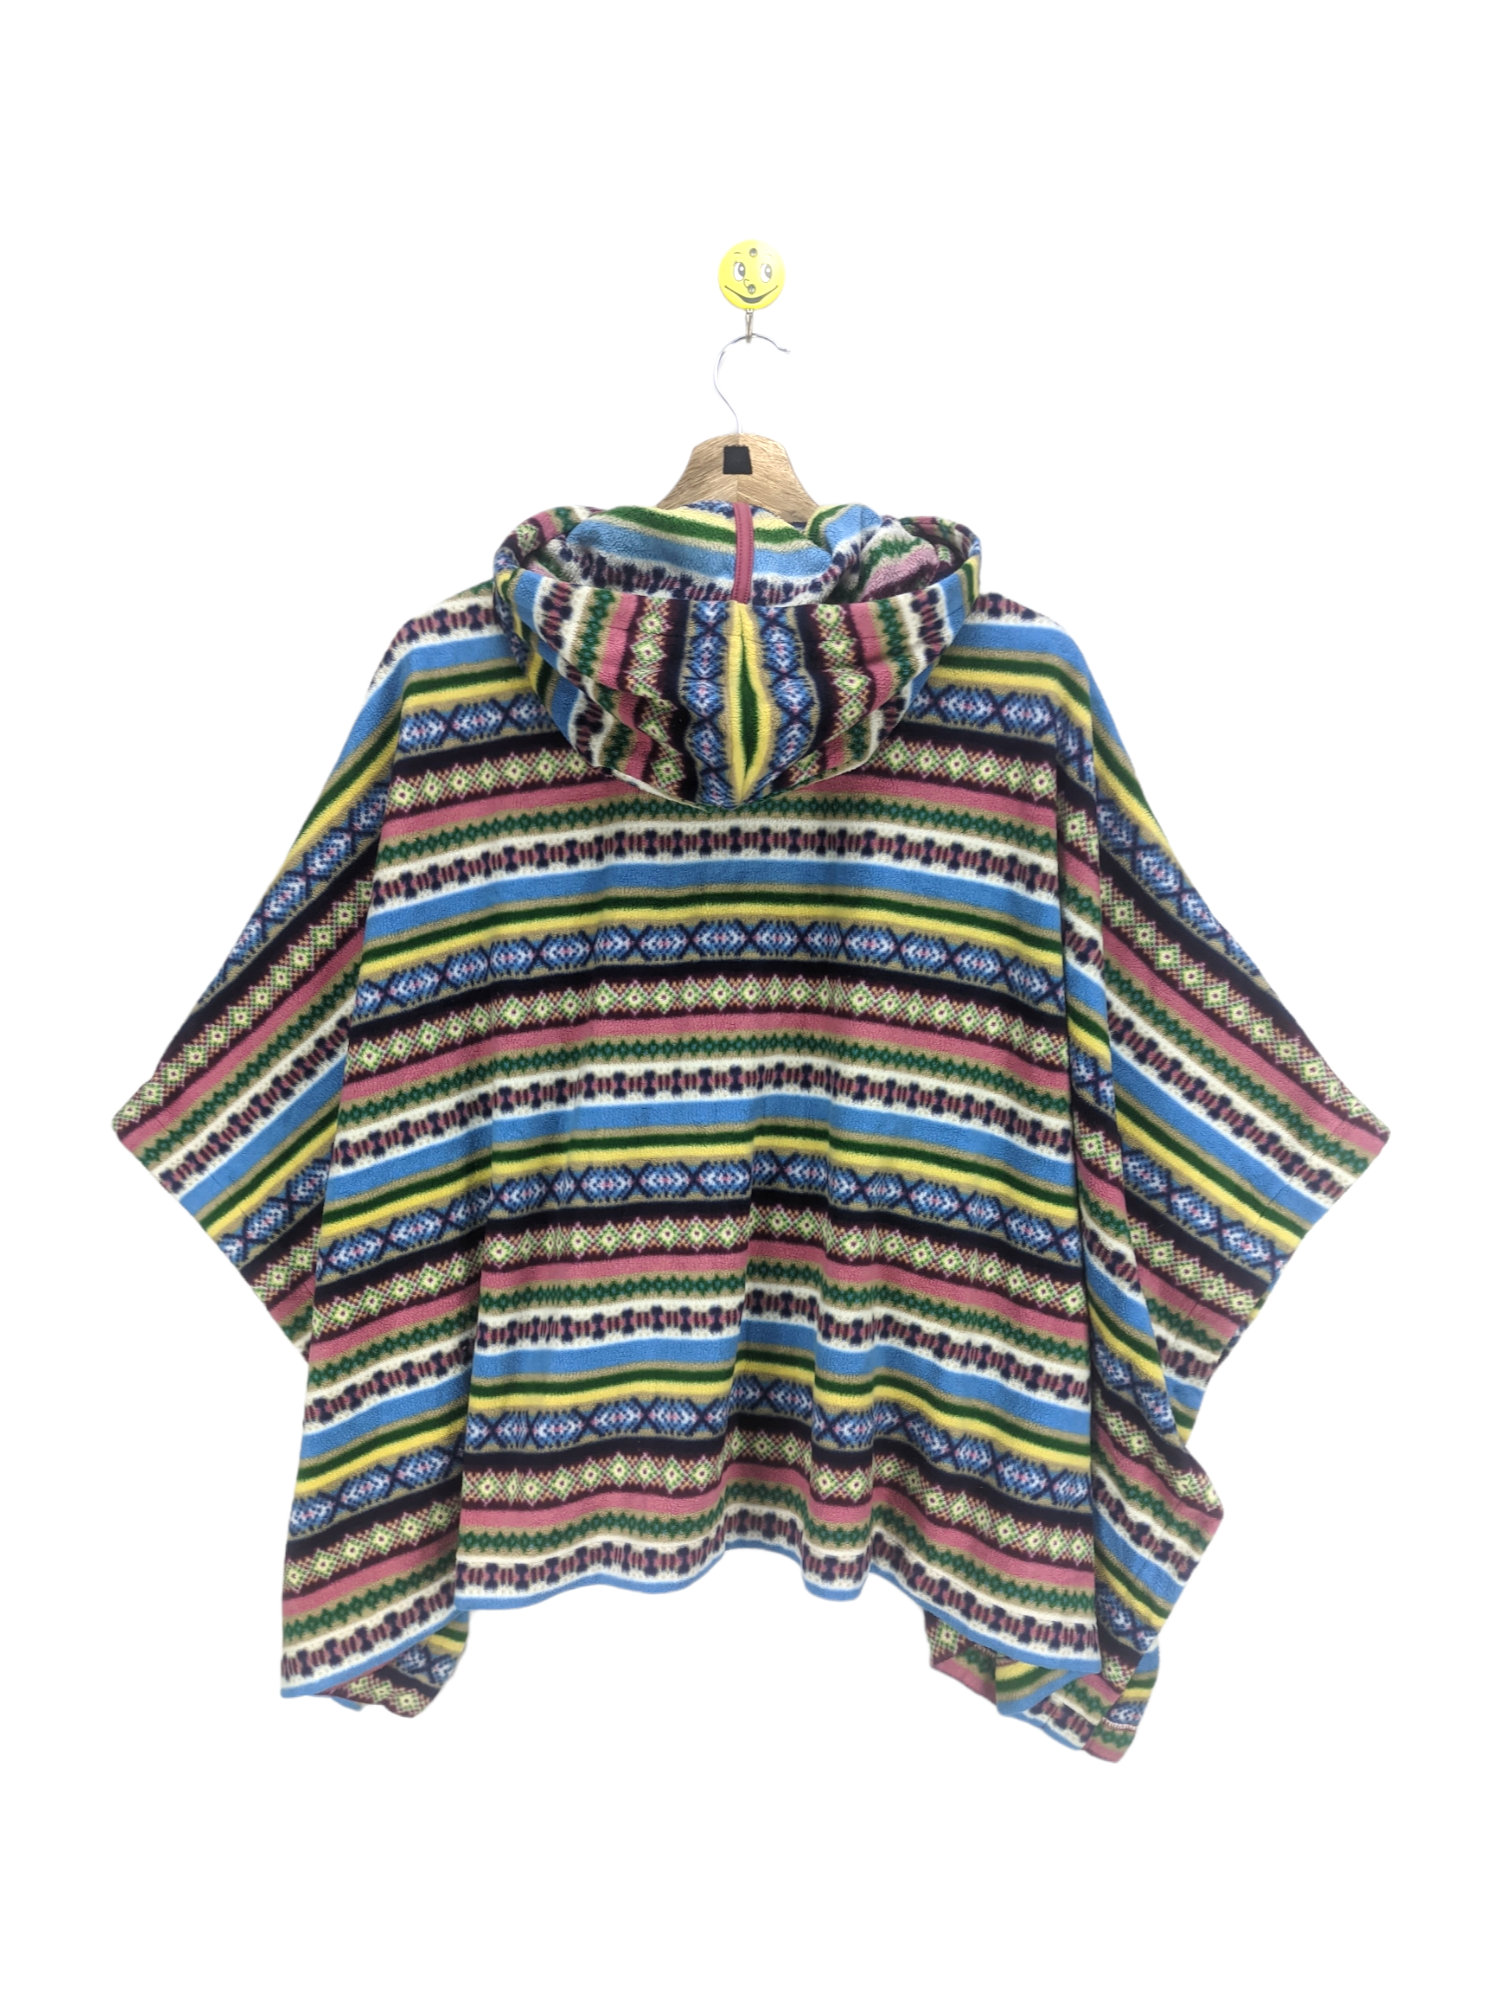 Uniqlo - Steals🔥Uniqlo Poncho Hooded Navajo Patterned - 2